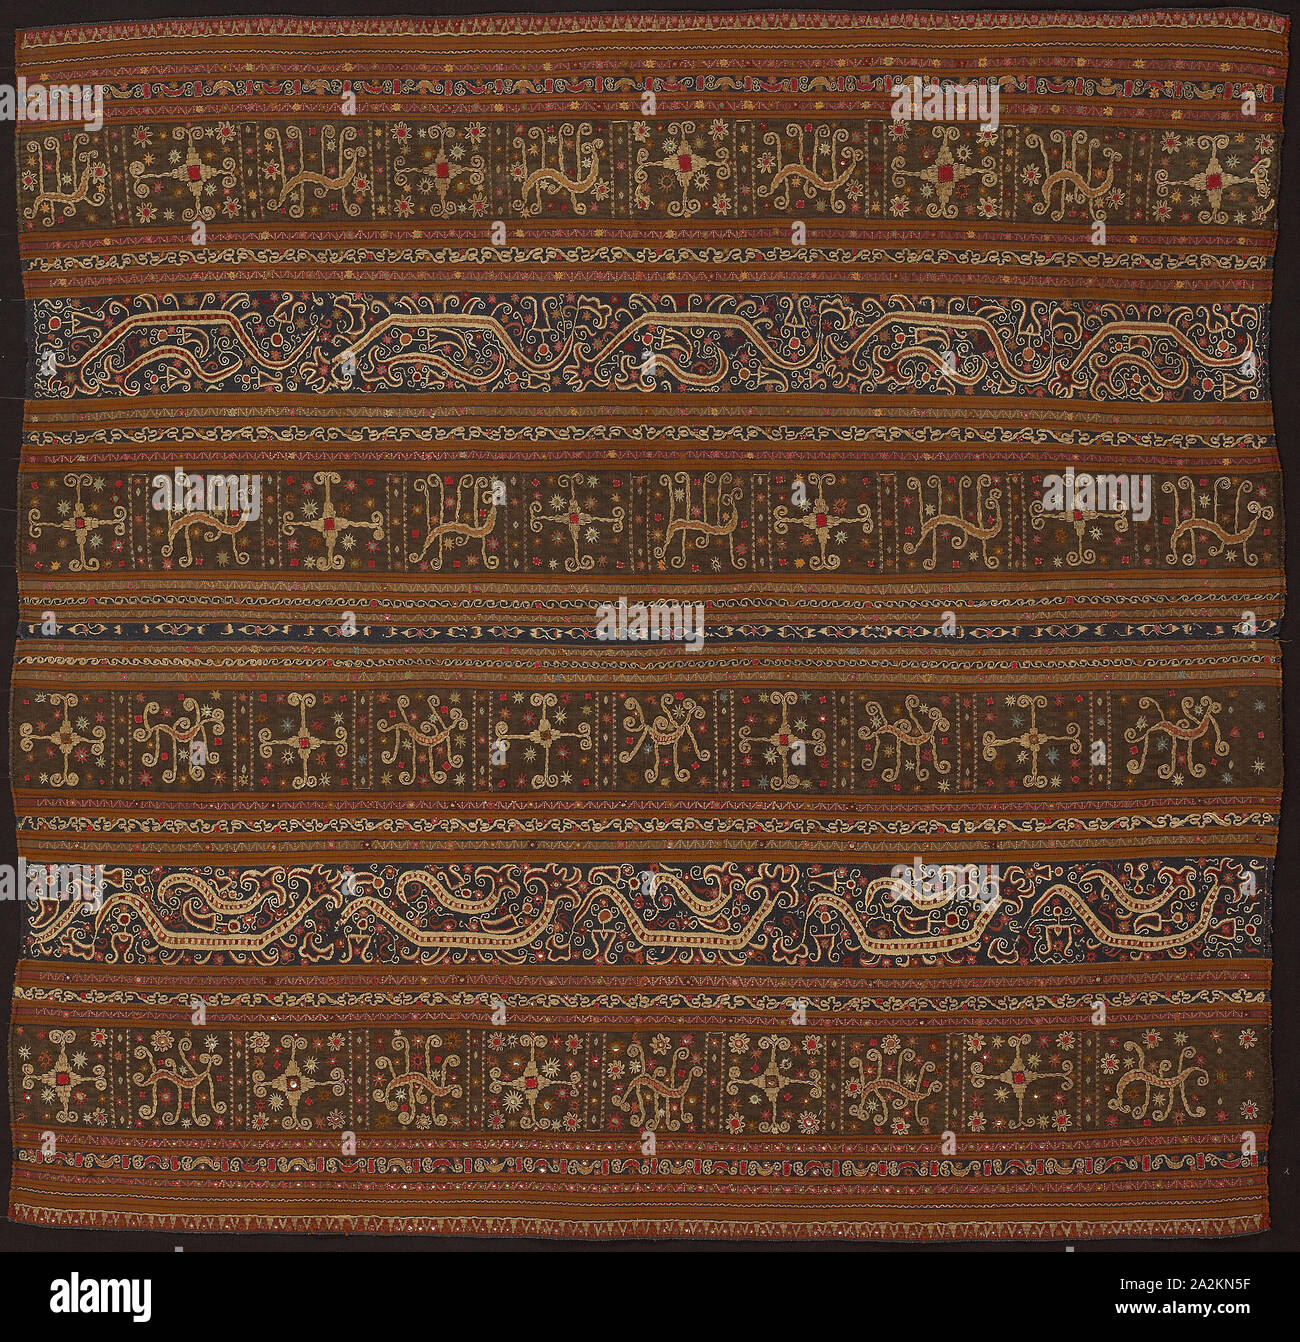 Ceremonial Skirt (tapis), Early 19th century, Abung people, Indonesia, South Sumatra, northern Lampung area, Monggala, Indonesia, Two panels joined: cotton and silk, stripes of warp-faced, weft ribbed plain weave, warp-faced, weft ribbed plain weave with supplementary brocading wefts, and warp resist dyed (warp ikat) plain weave with supplementary brocading wefts, appliquéd with wool, plain weave, embroidered with silk, cotton, pineapple fiber, silver-leaf-over-lacquered-paper strip wrapped cotton and silver-leaf-over-lacquered-paper strip wrapped bast fiber (probably ramie) in buttonhole Stock Photo